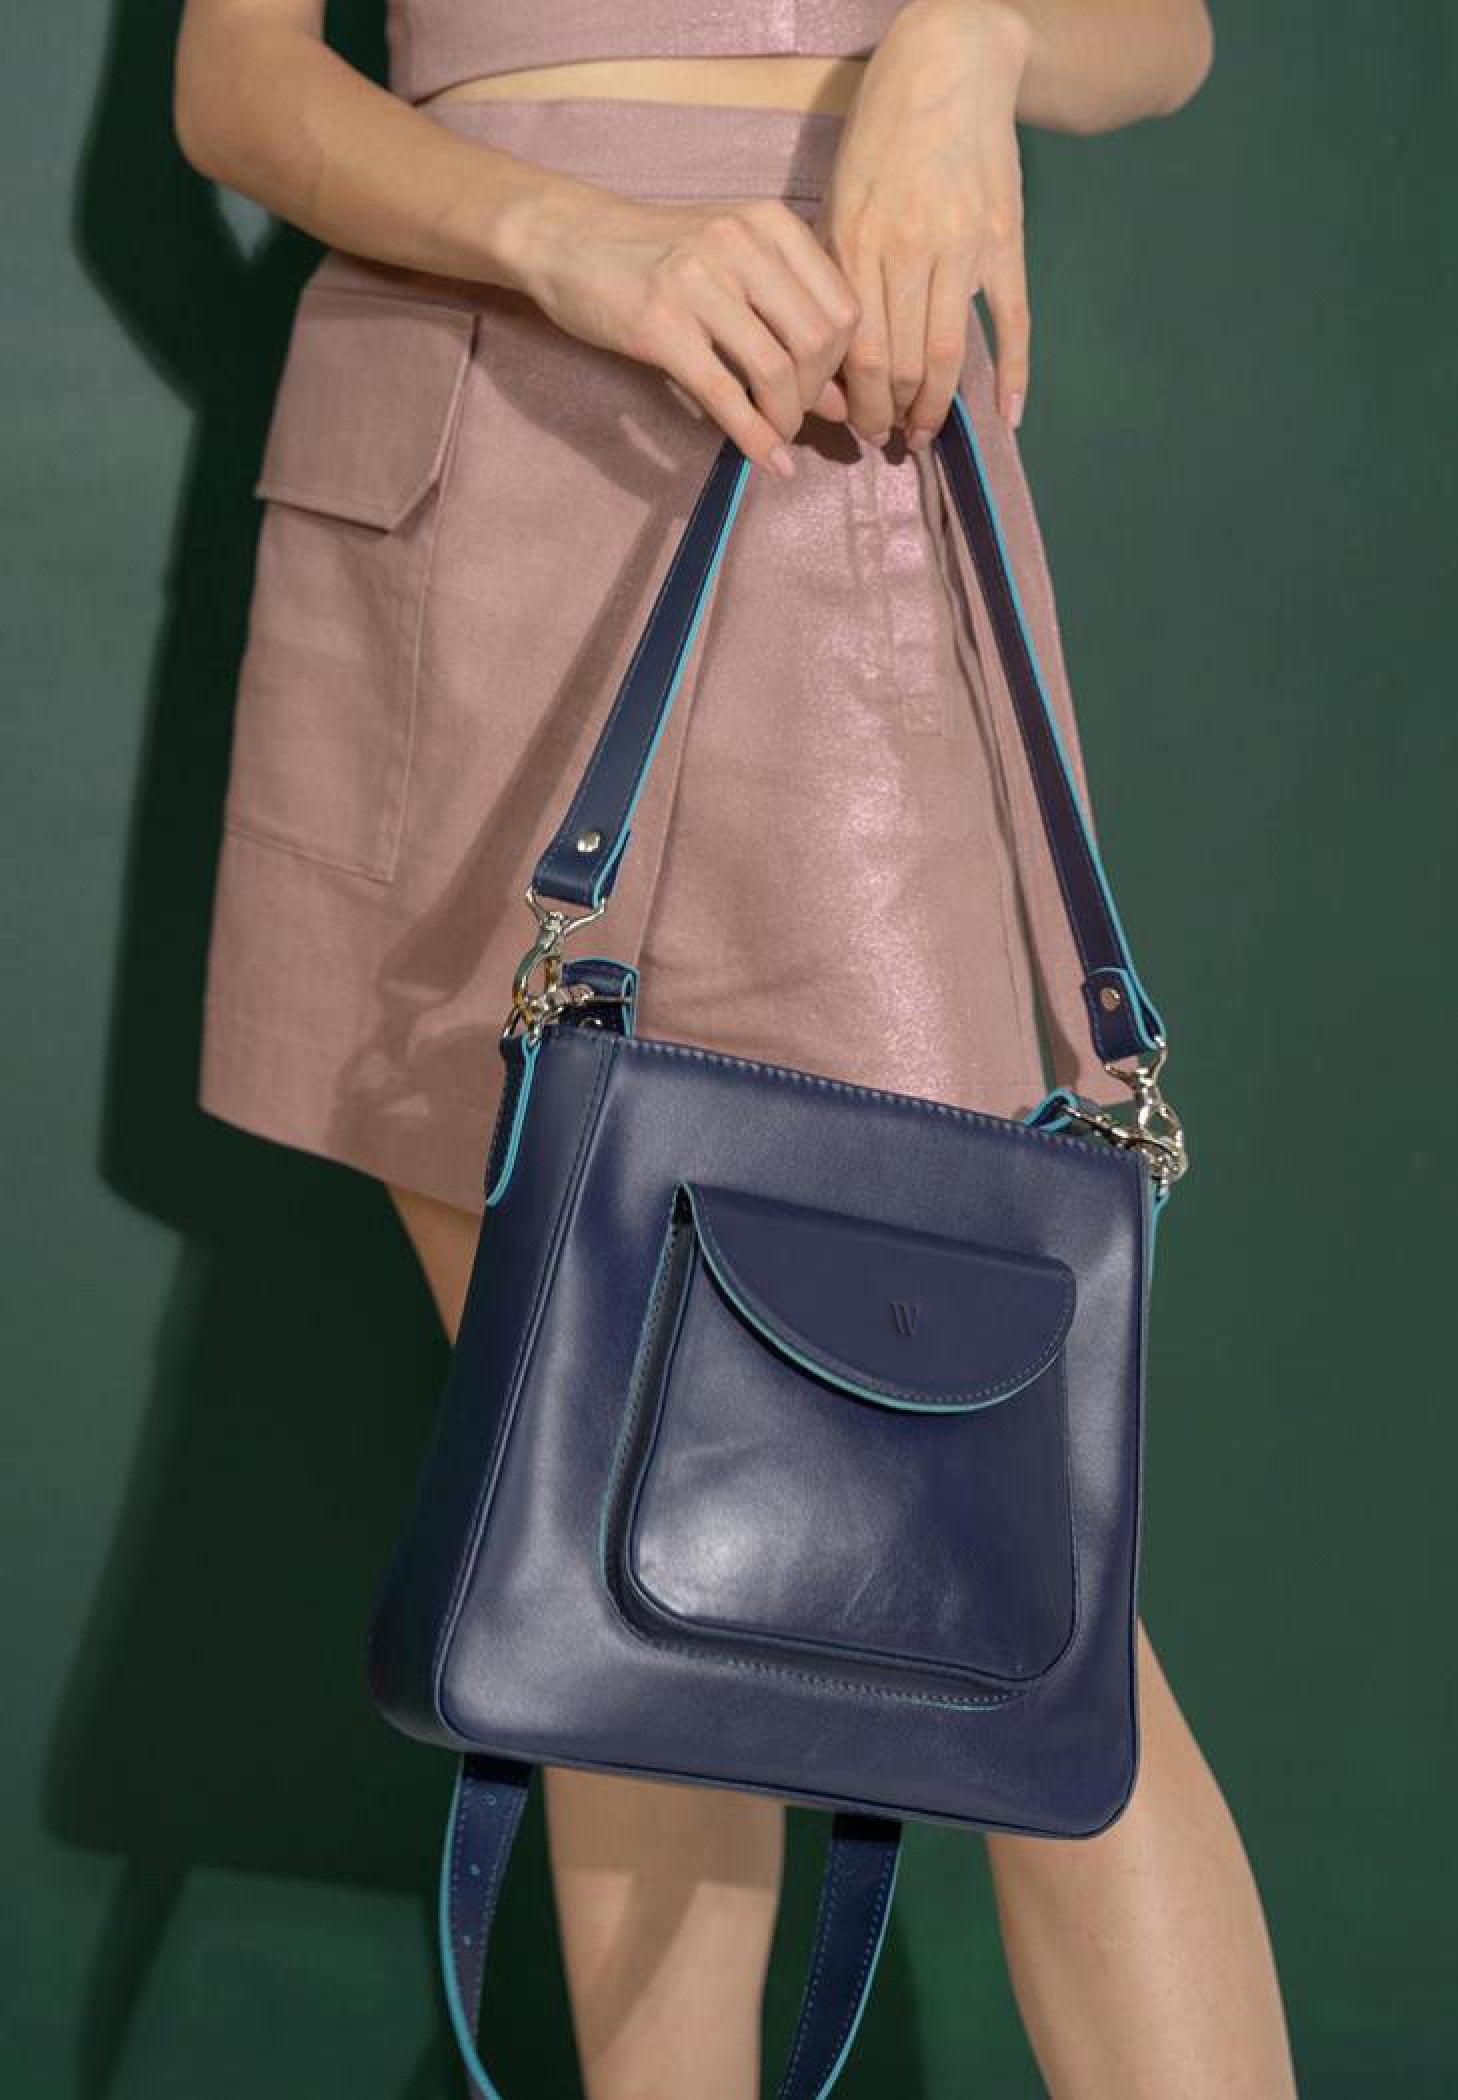 model is wearing a high quality leather bag for women in navy blue color